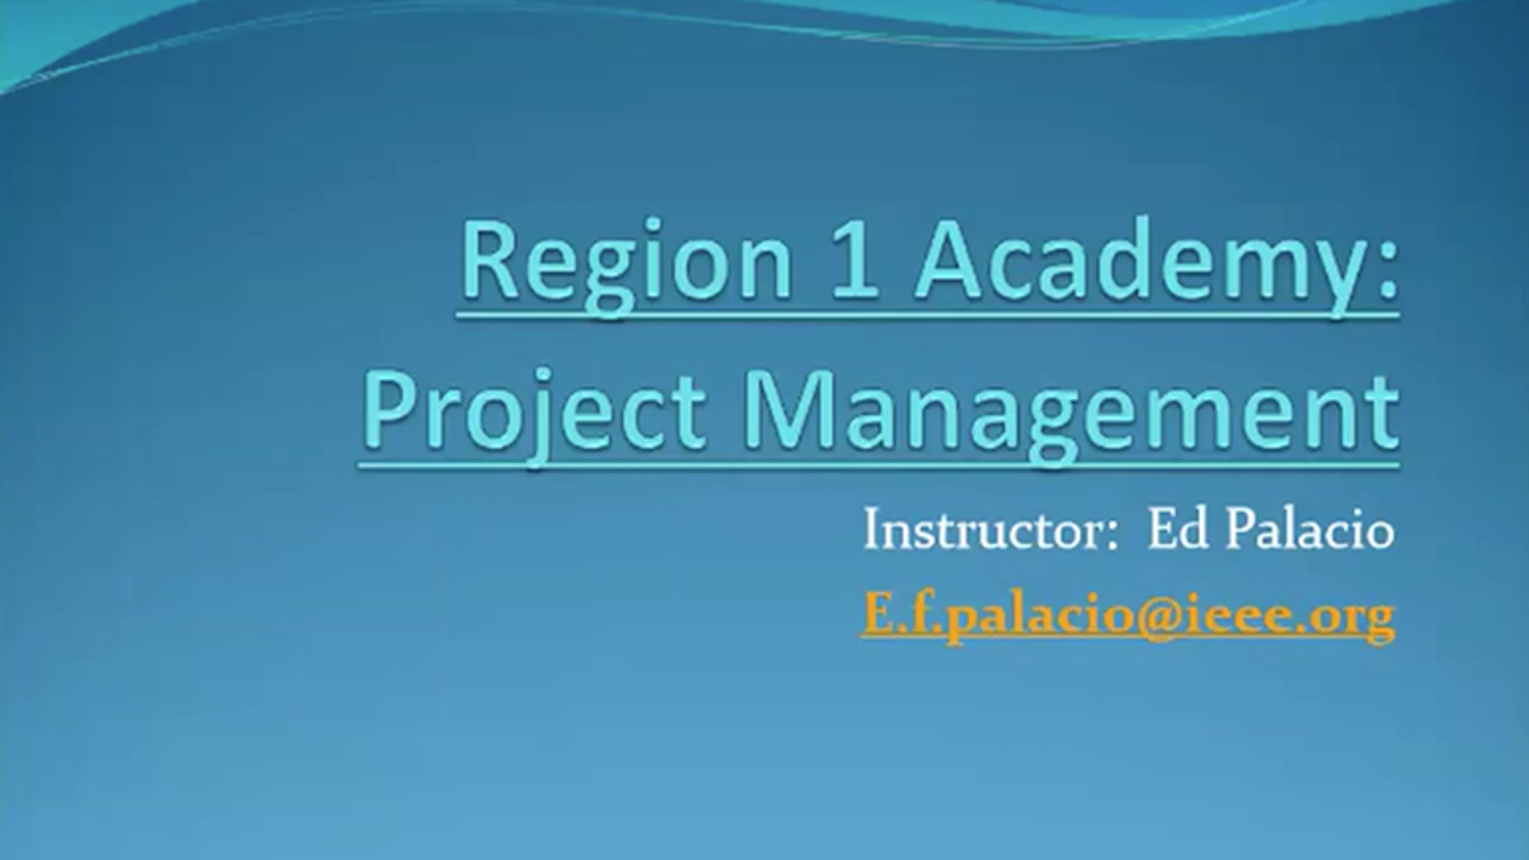 Project Management with Ed Palacio